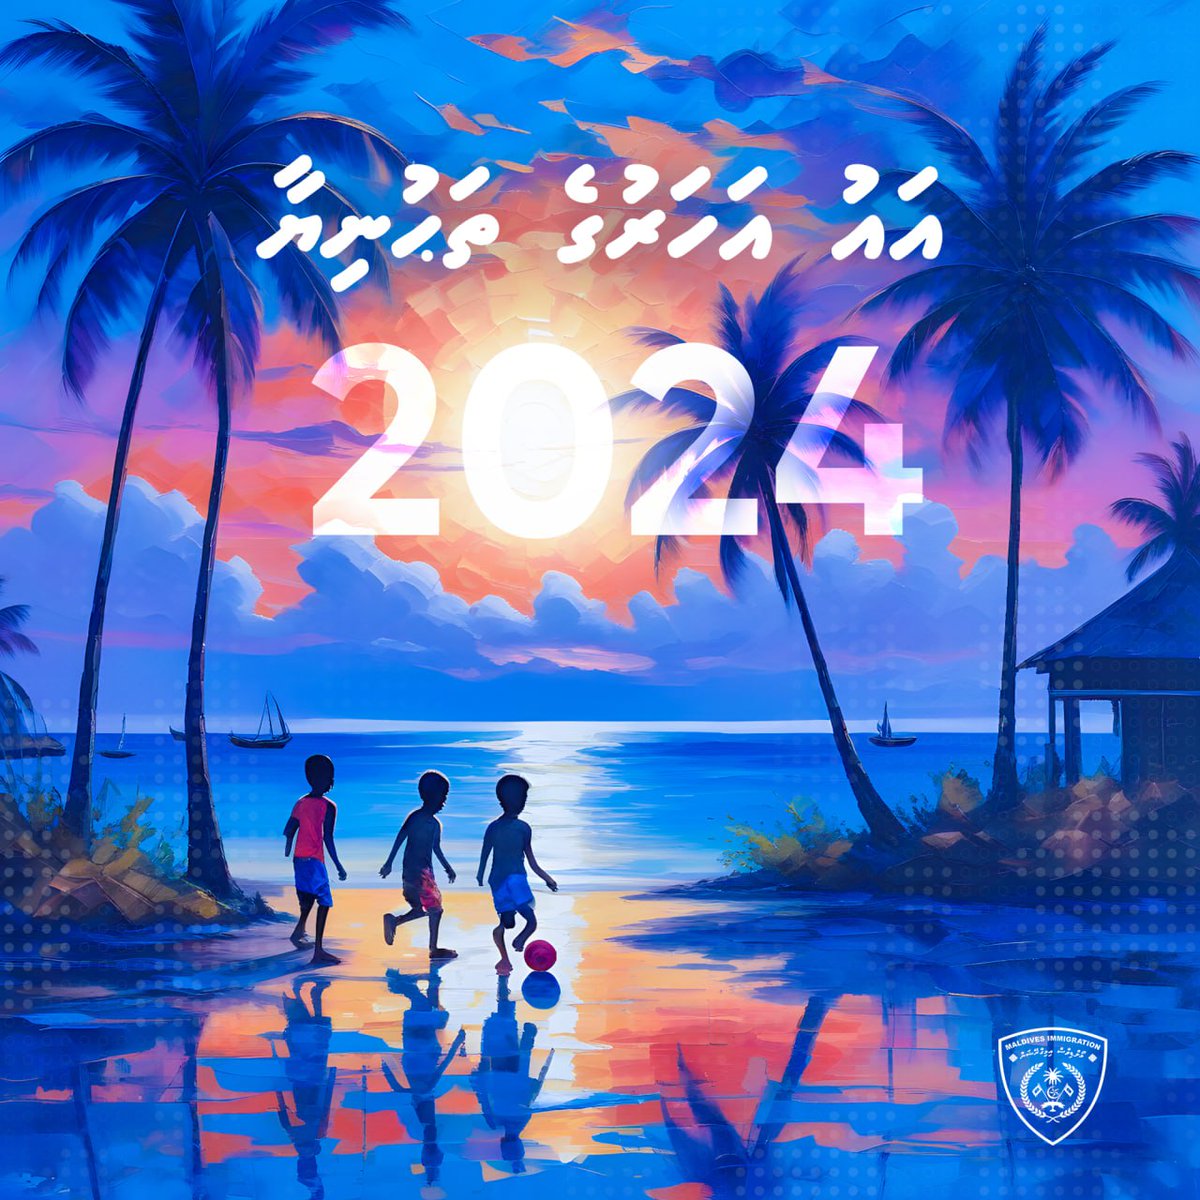 On behalf of Maldives Immigration, we wish everyone a very happy new year. 🎆